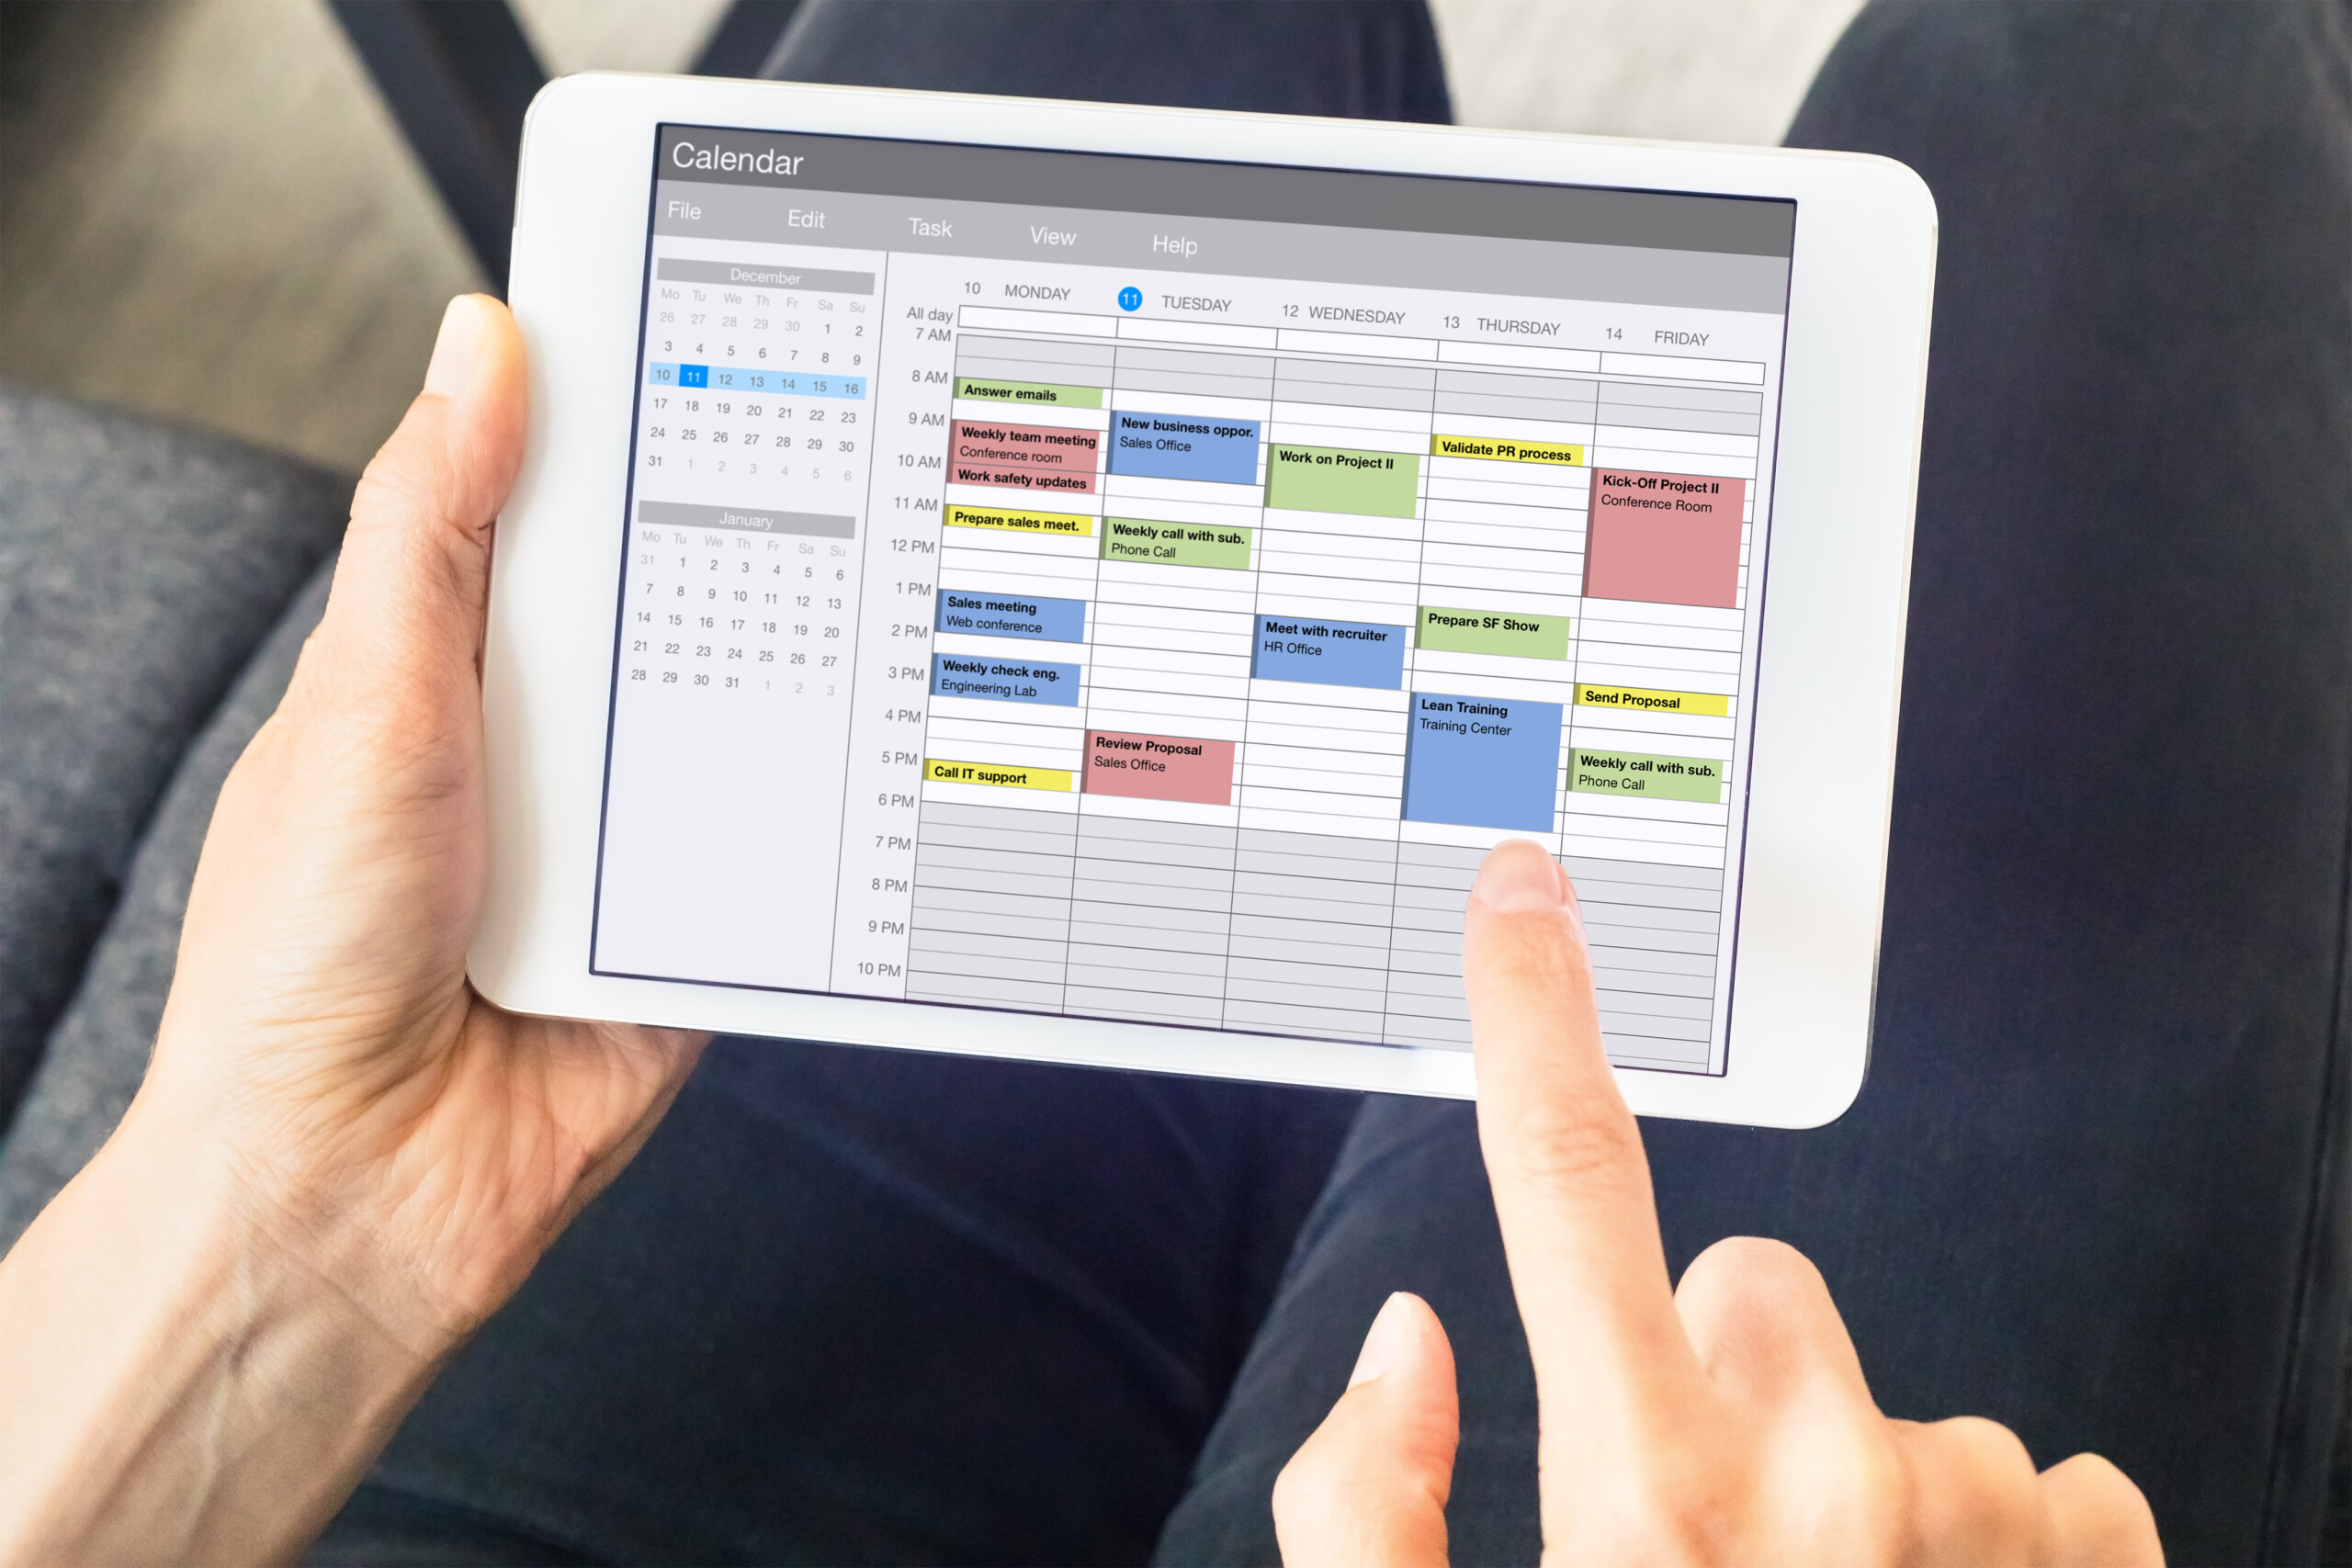 Calendar app on tablet computer with planning of the week with a